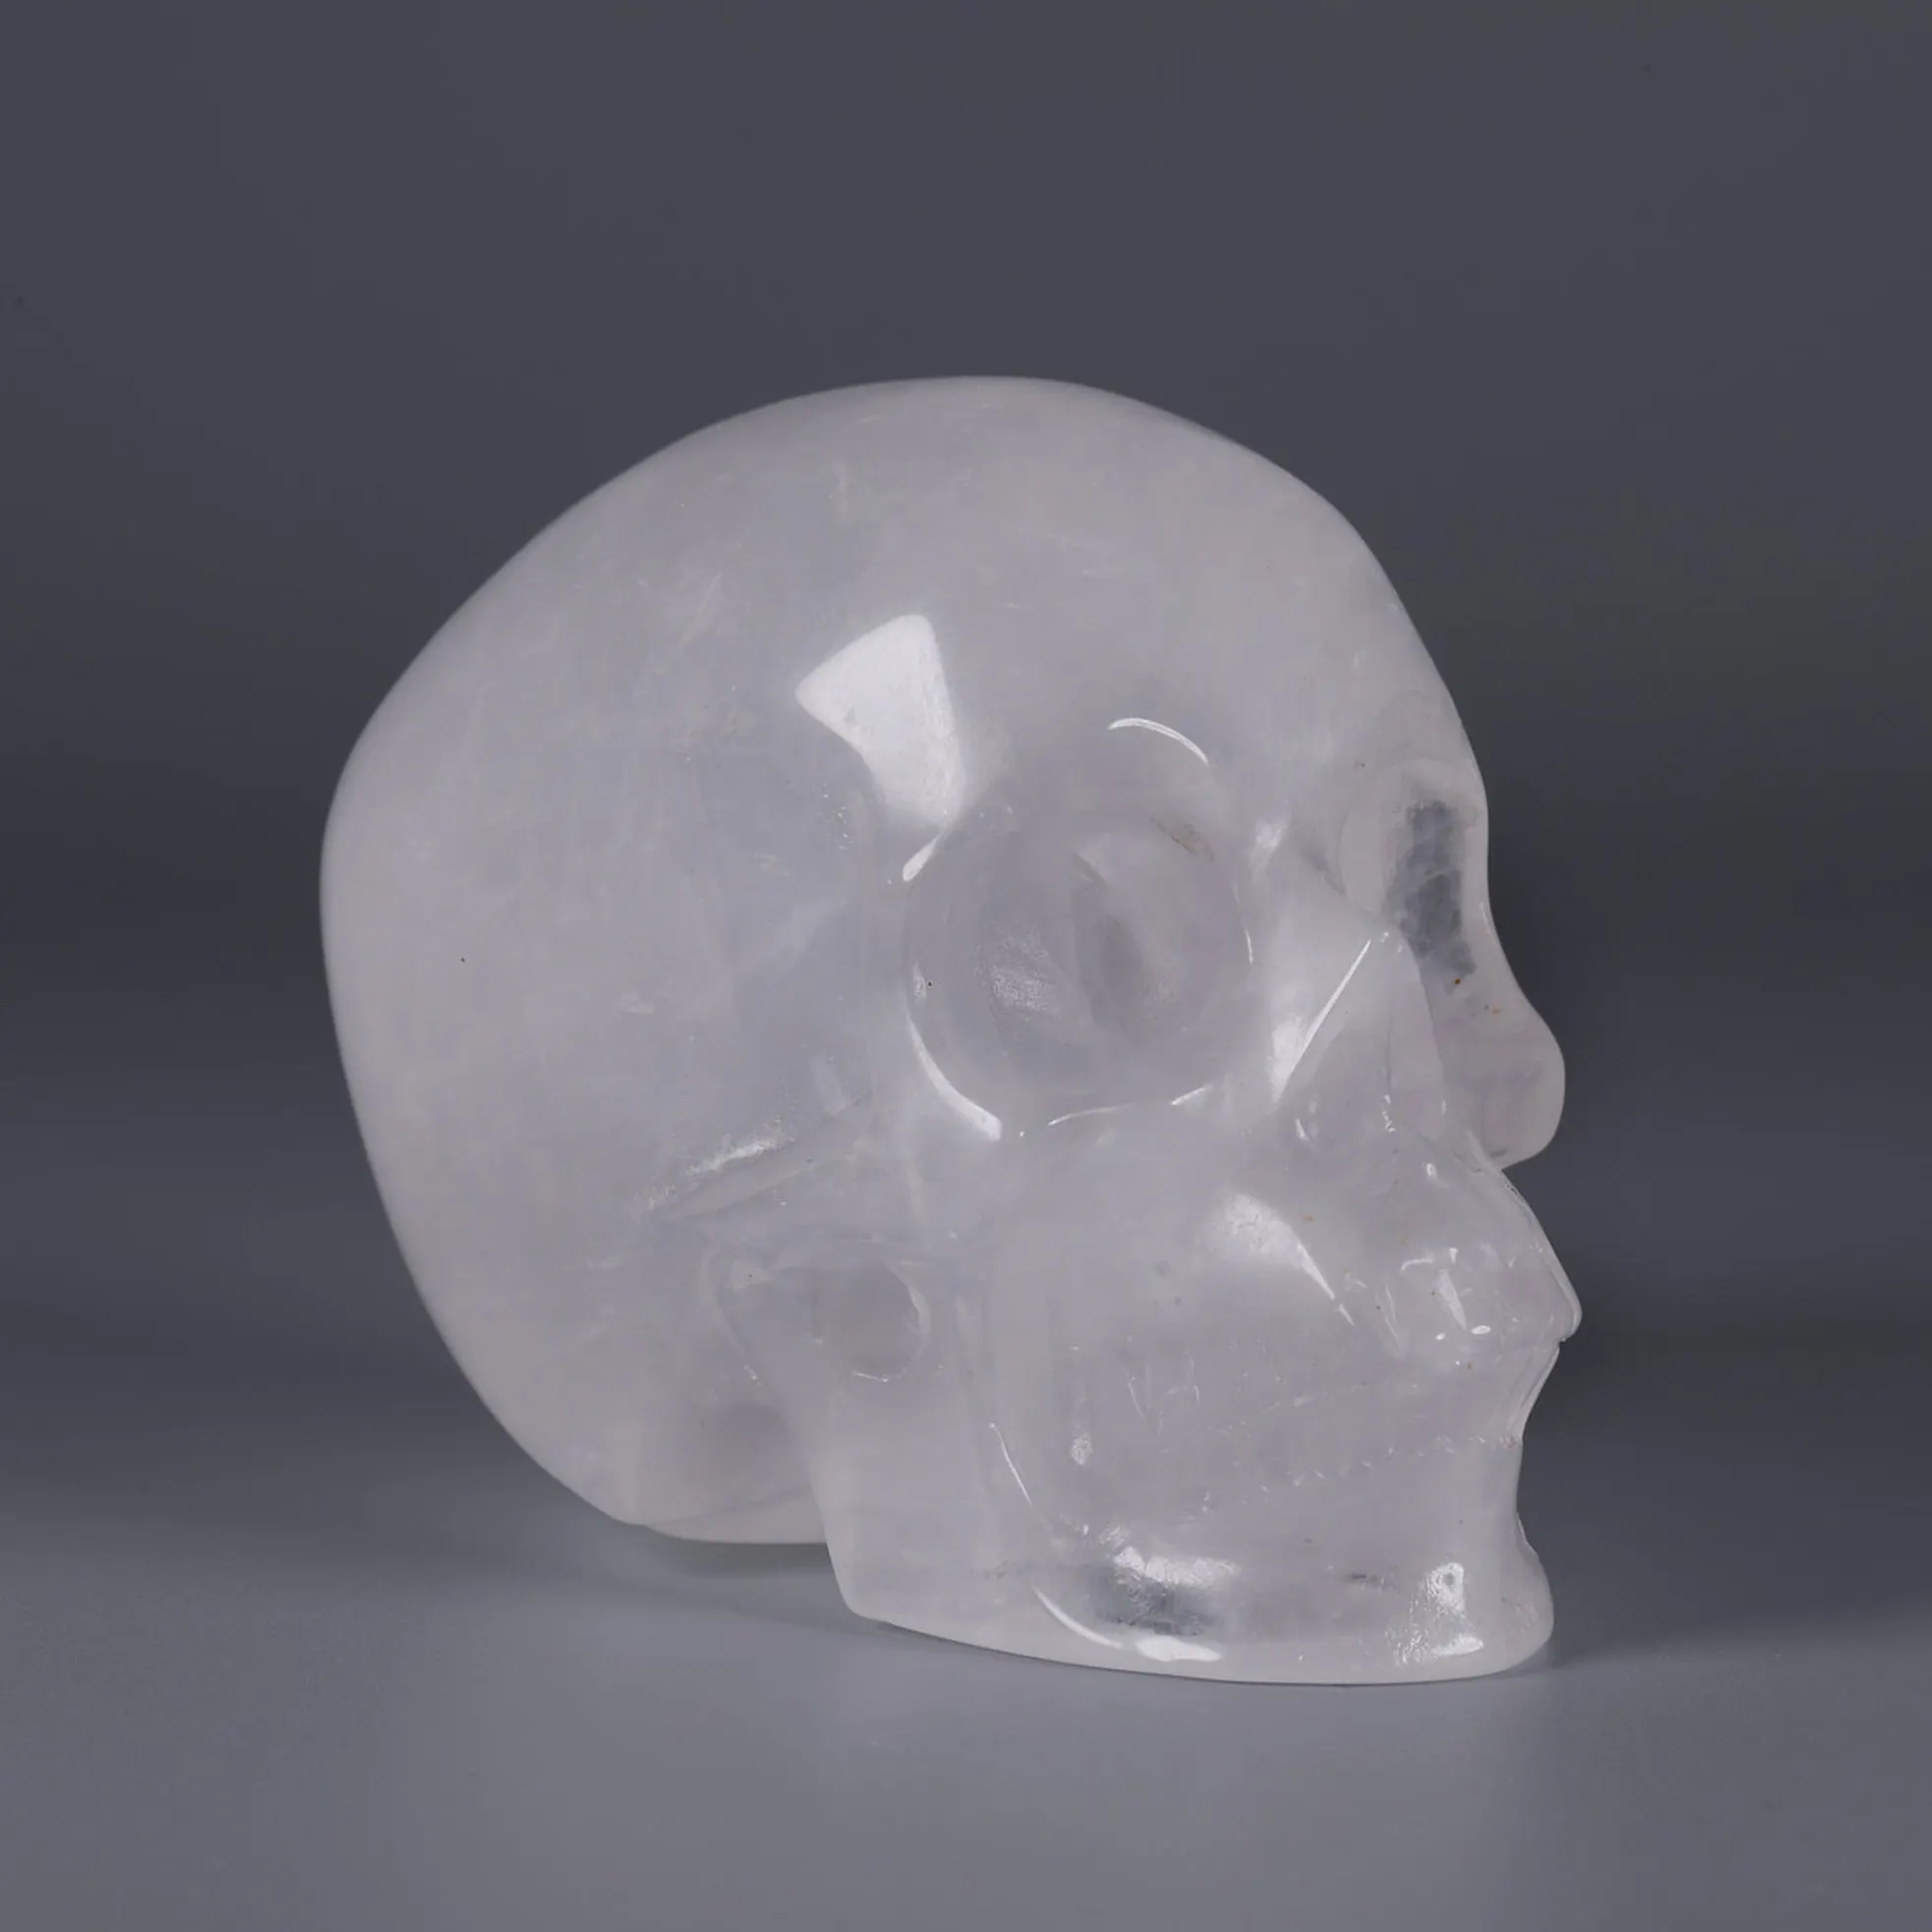 MR.SKULL Wholesale high quality clear quartz crystal skull Crystal Healing stones crystal crafts Holiday gift